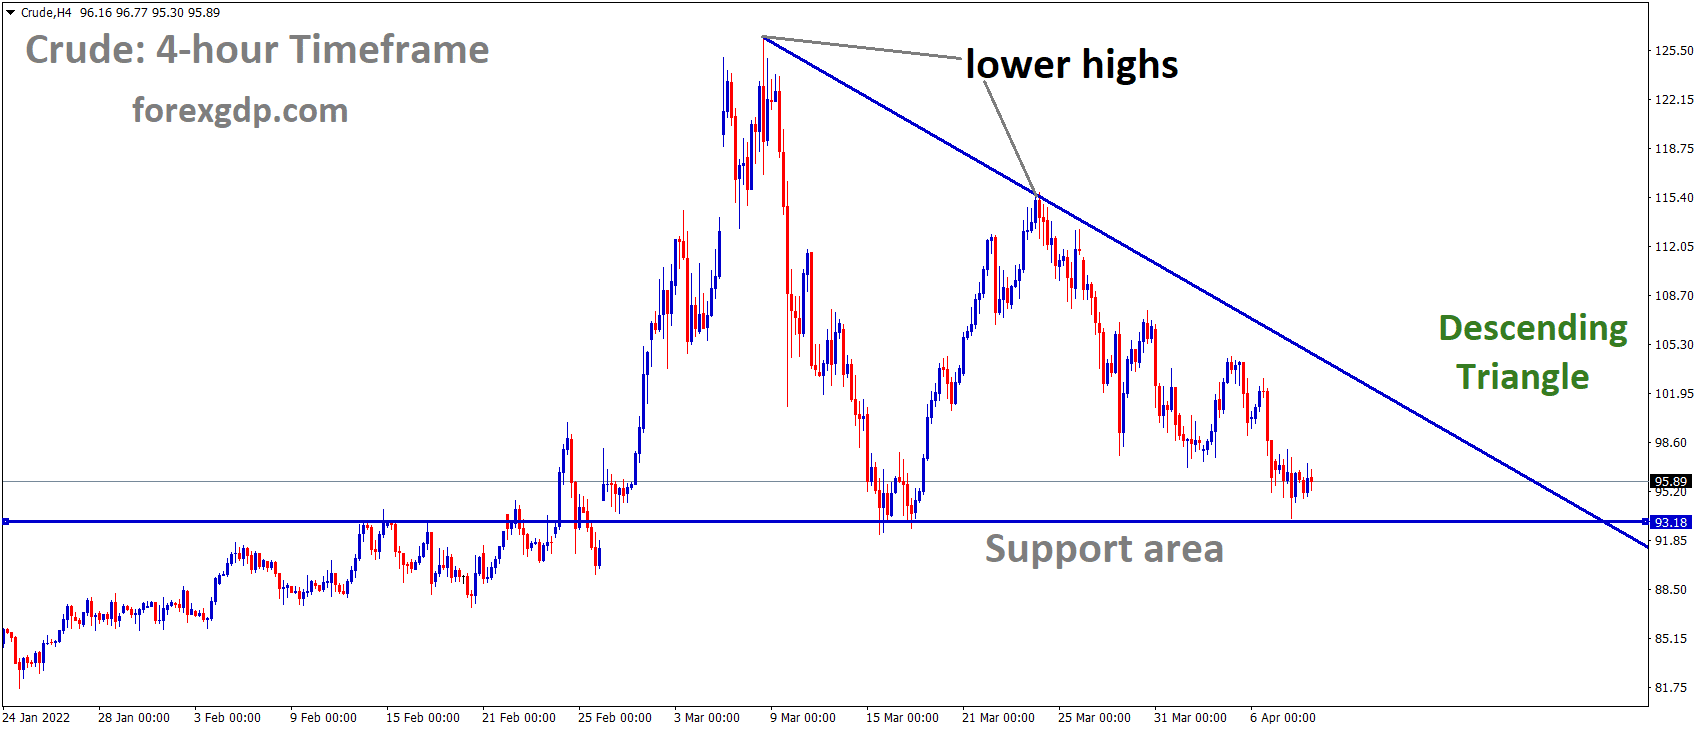 Crude H4 time frame Analysis Market is moving in the Descending triangle pattern and the market has reached the horizontal support area of the pattern. 1